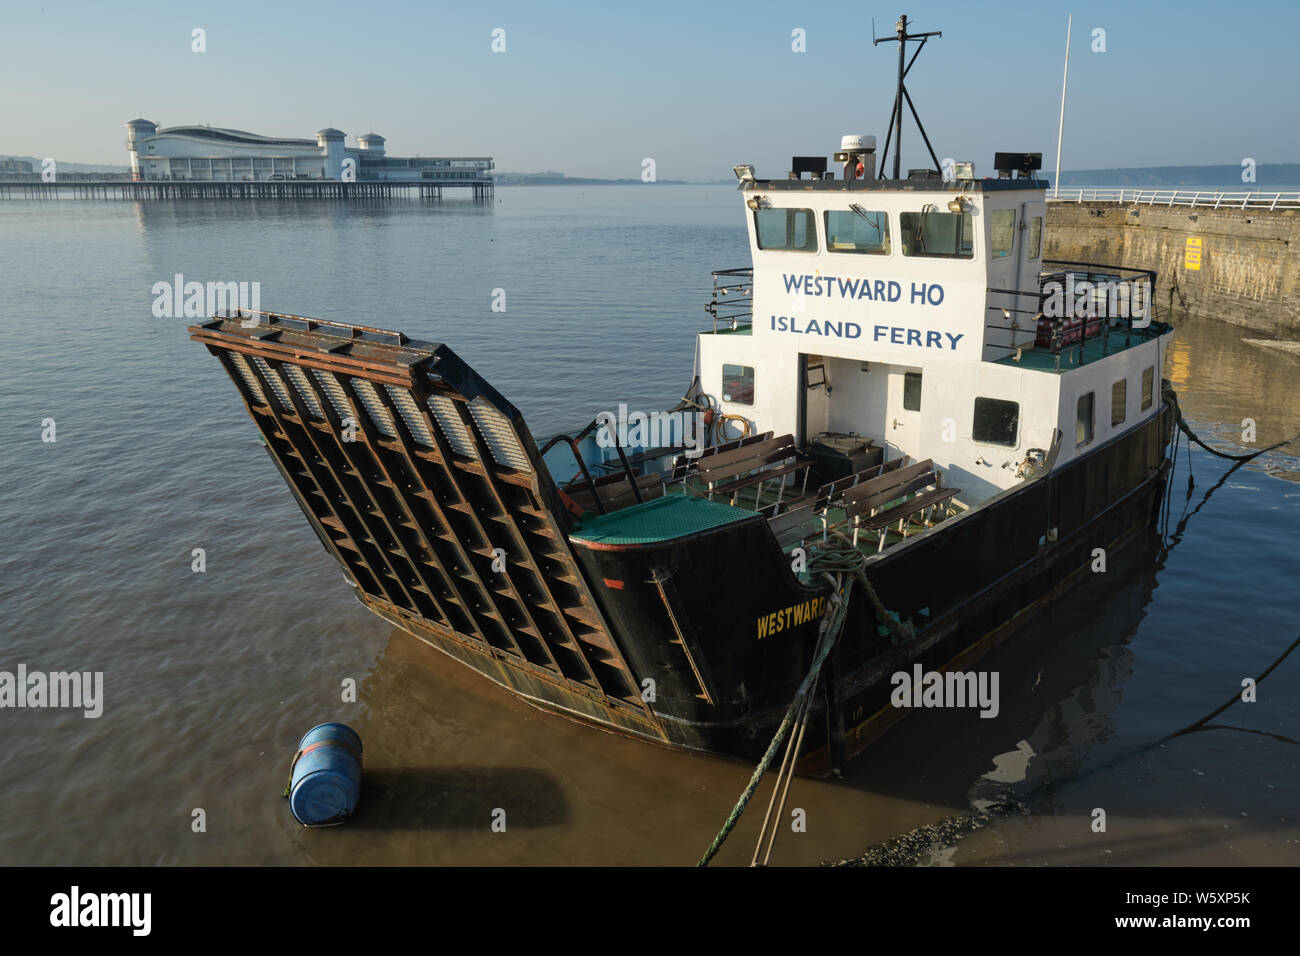 Westward Ho, ferry boat tied up alongside at Knightstone island in Weston Super Mare, at high tide with the grand Pier in the background. Stock Photo